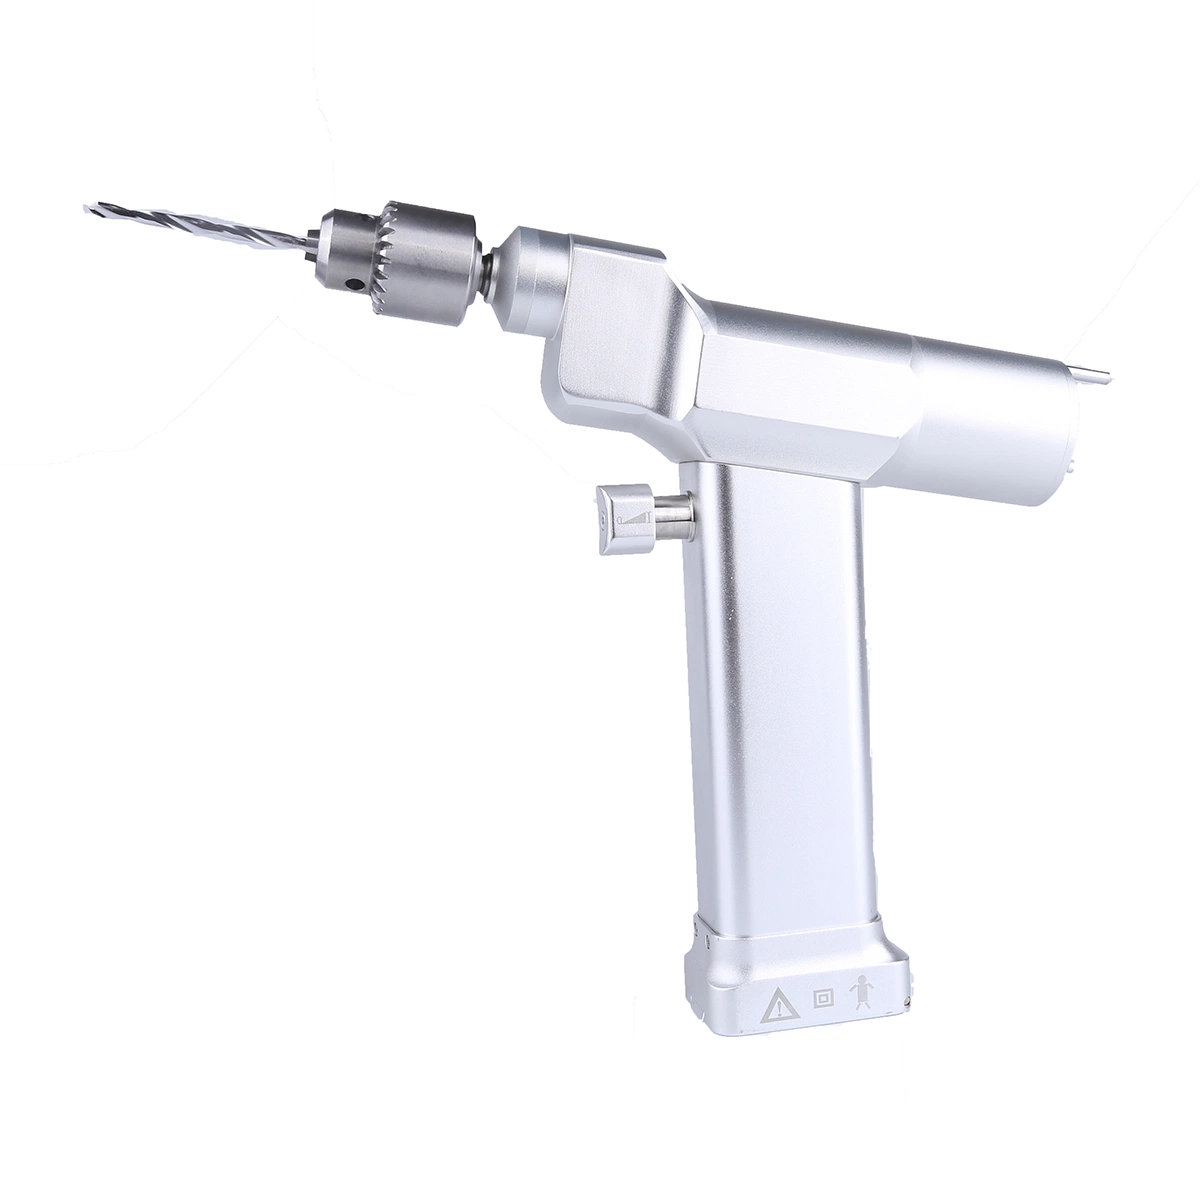 Orthopaedic Surgical Instruments Medical Power Tools Electric Small Hand Cannulated Bone Drill with Battery